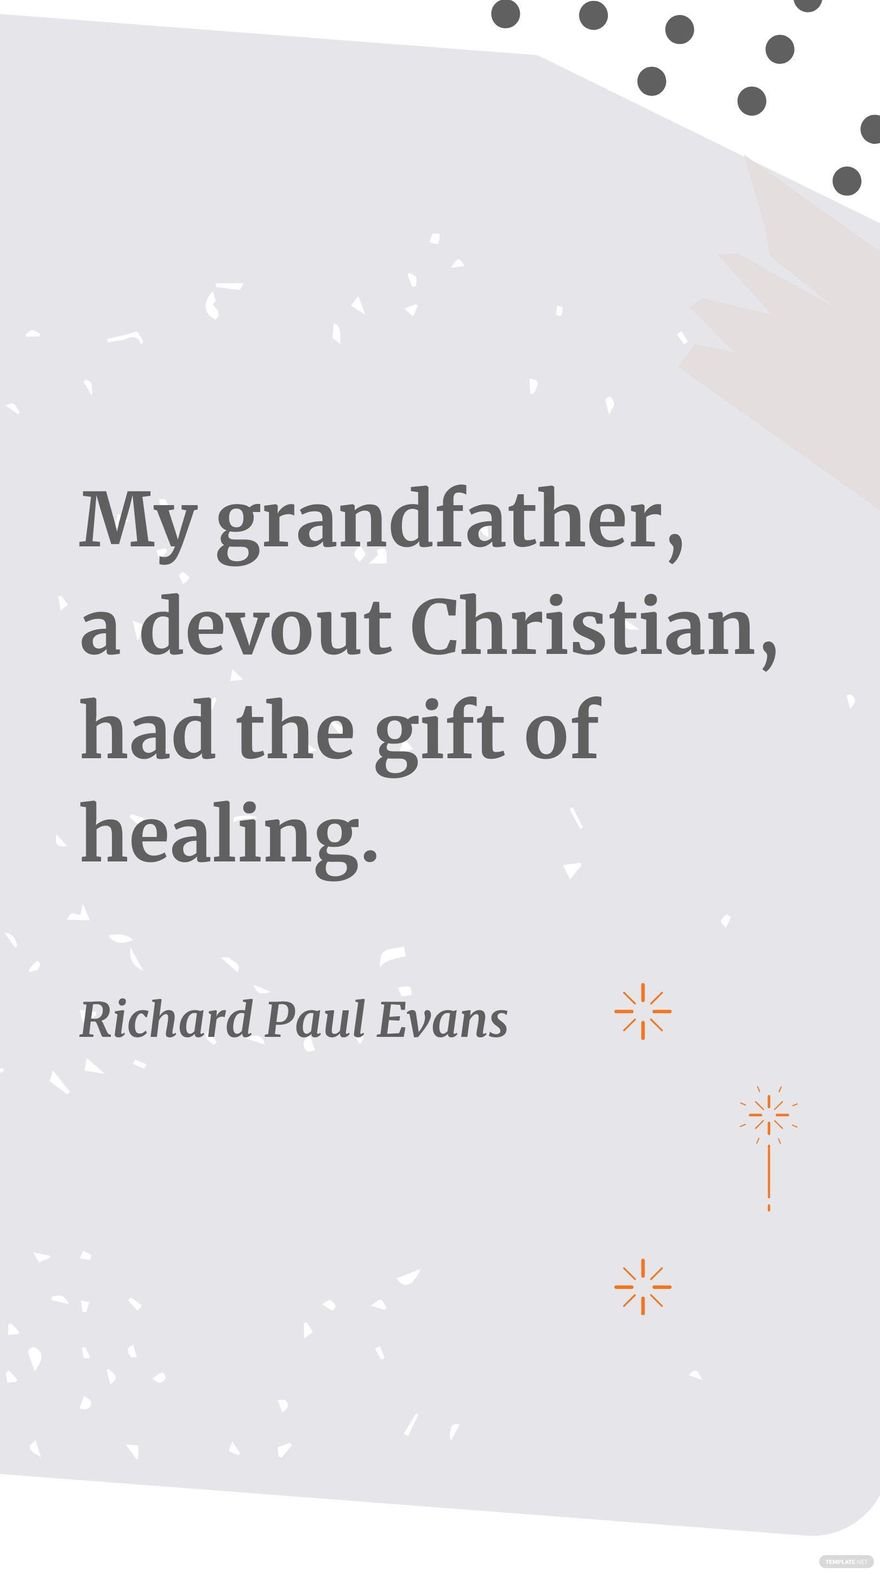 Richard Paul Evans - My grandfather, a devout Christian, had the gift of healing.